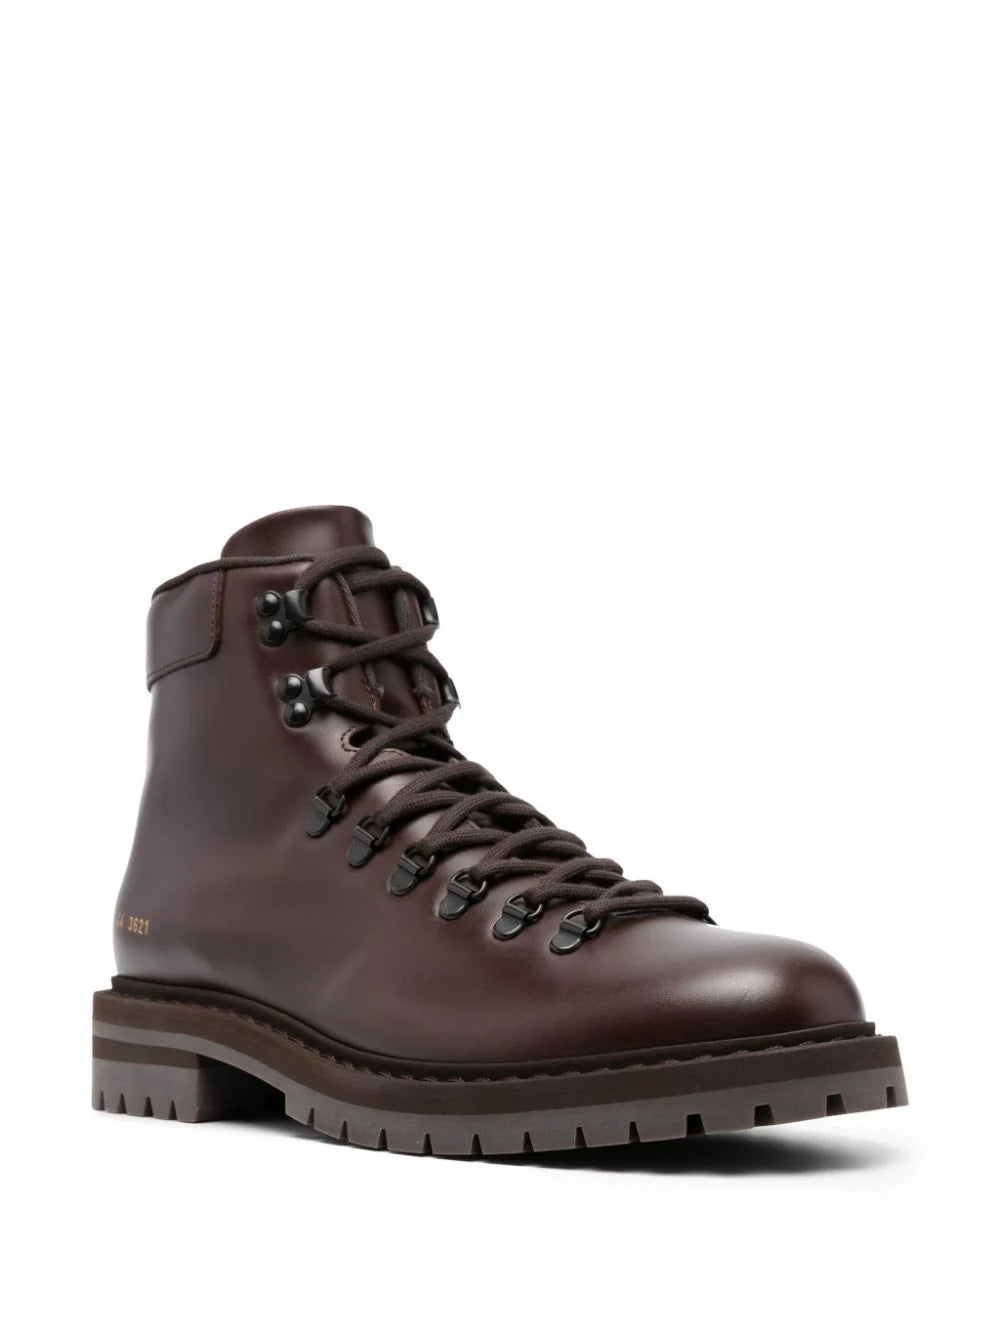 Shop Common Projects Lace-up Leather Ankle Boots